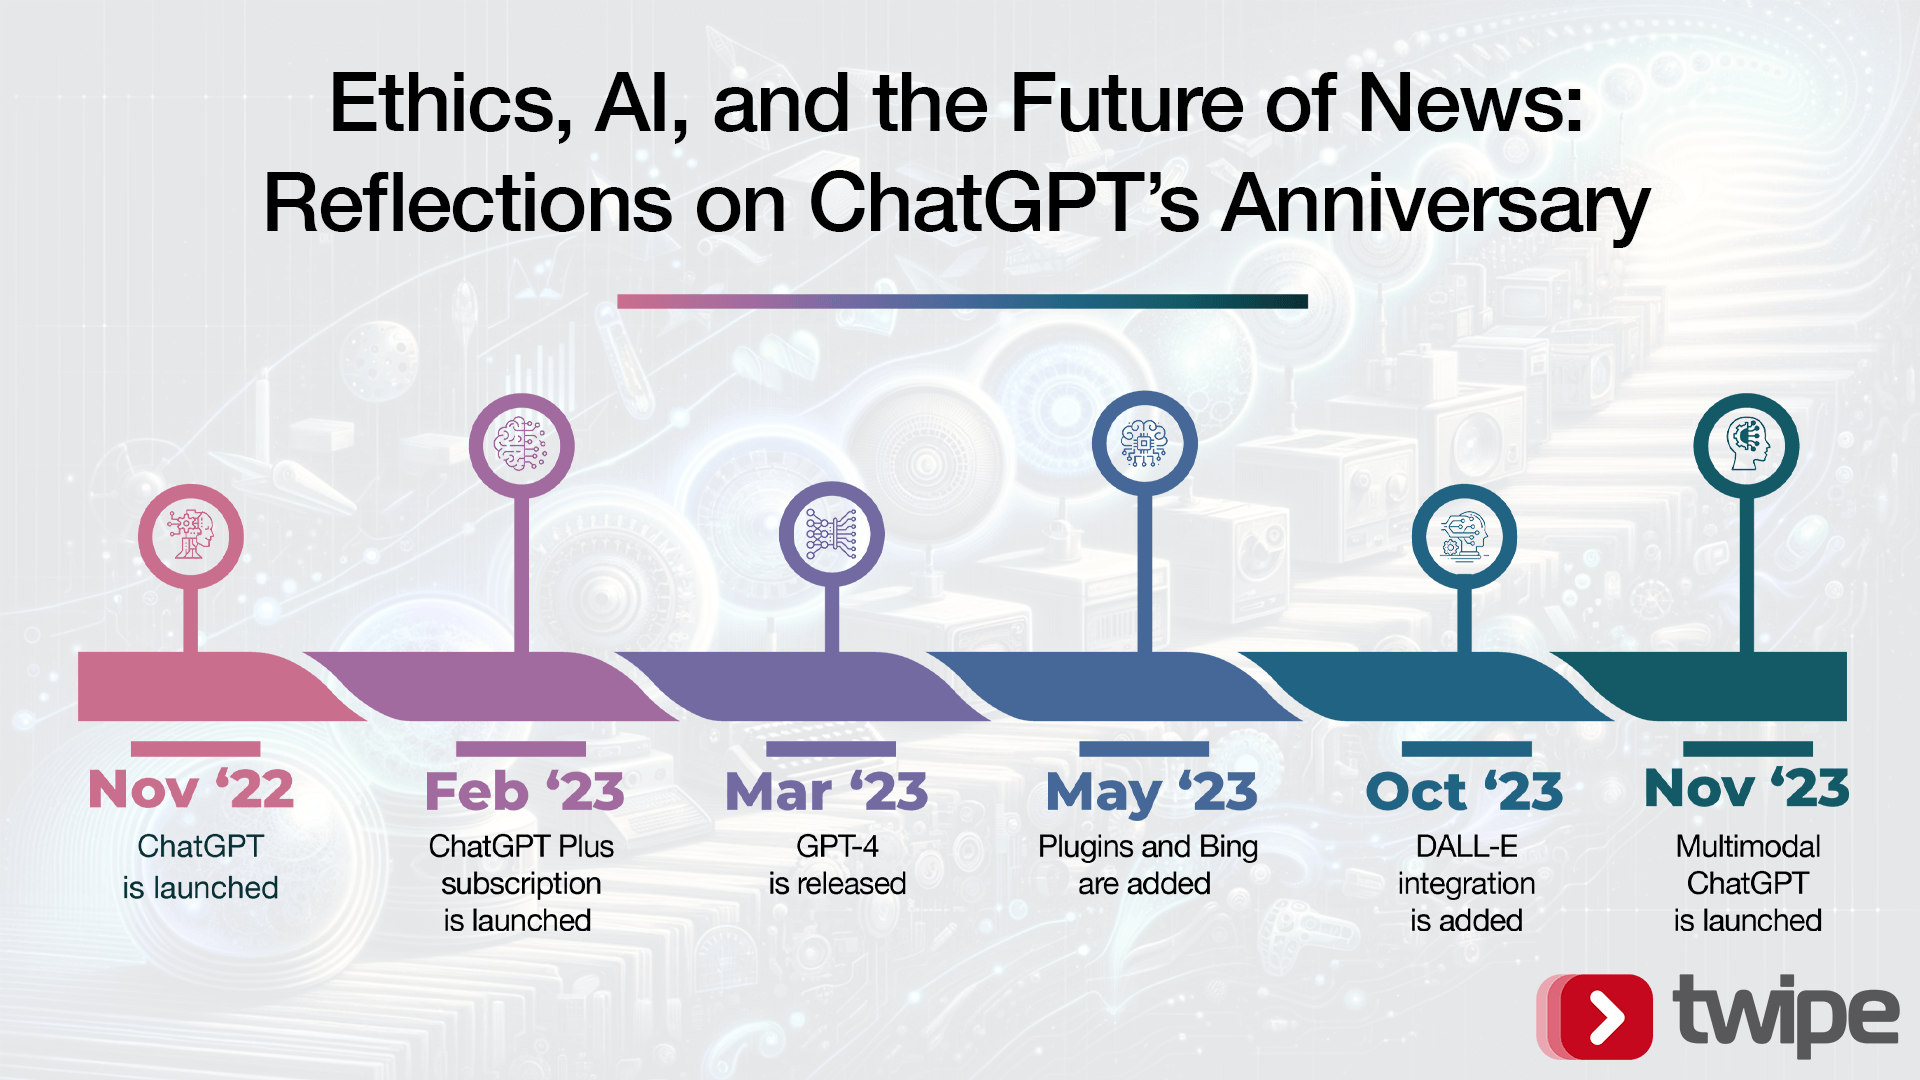 Ethics, AI, and the Future of News: Reflections on ChatGPT’s Anniversary   - Twipe